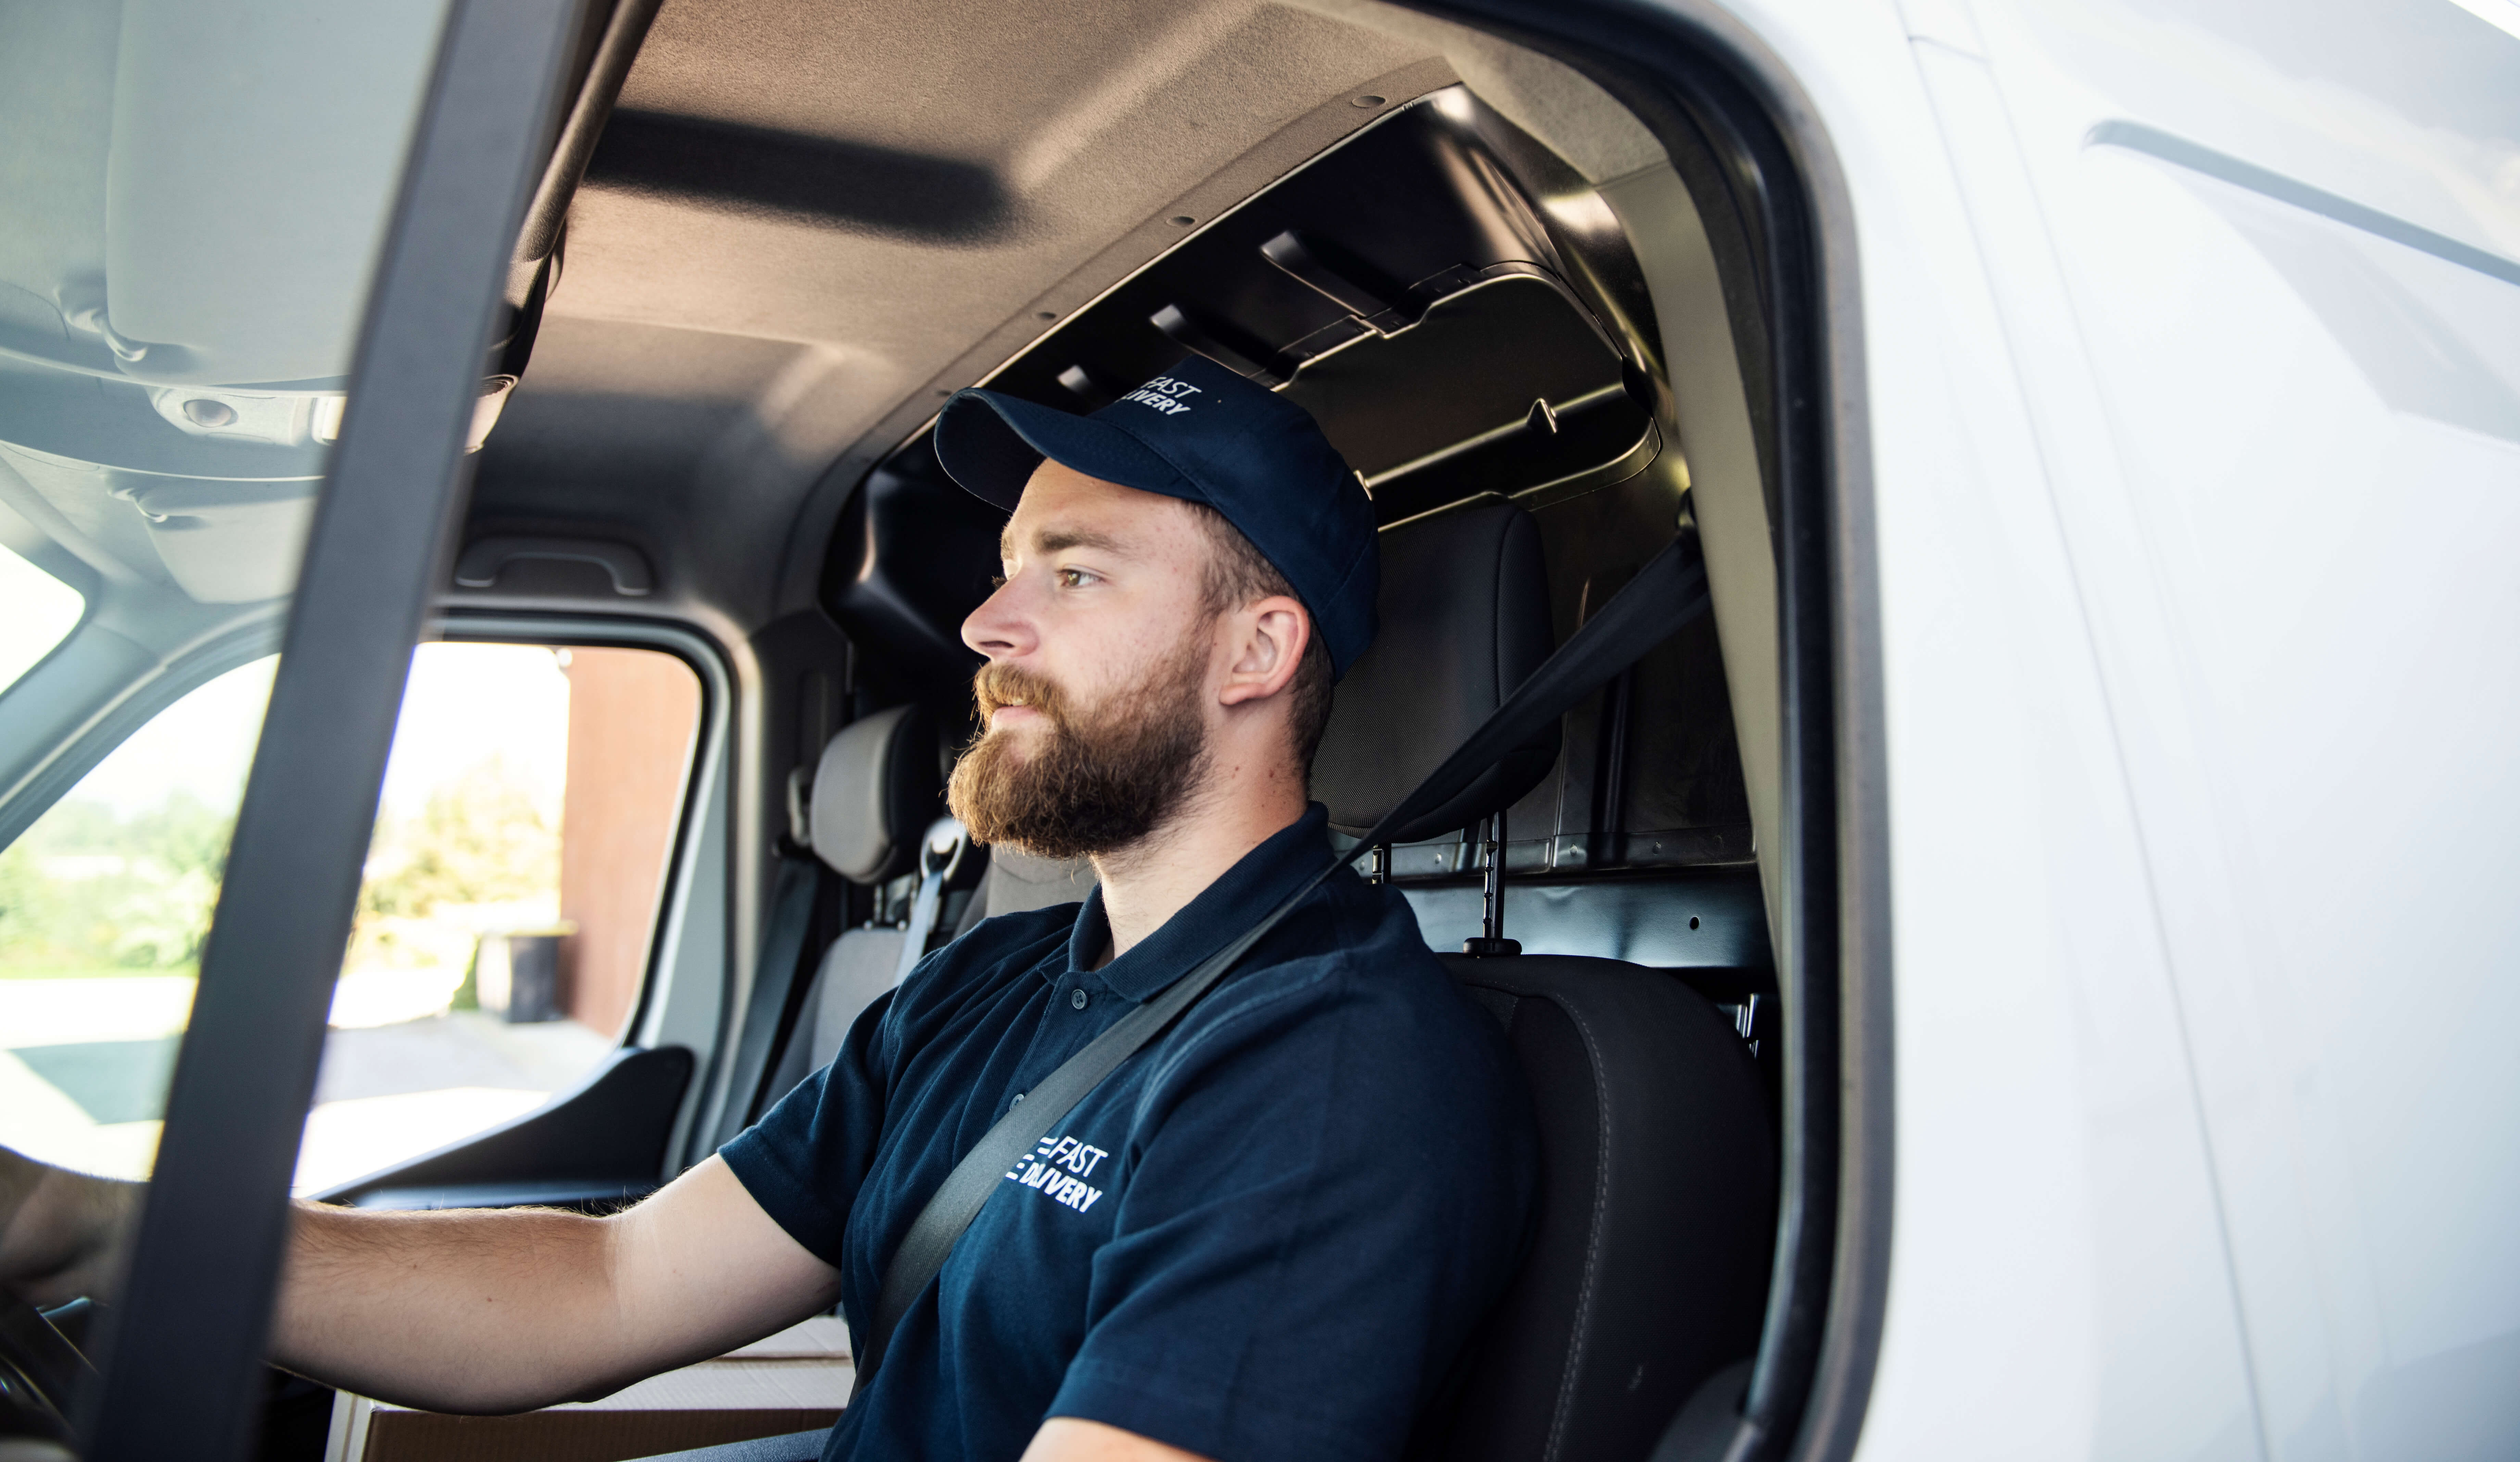 Delivery driver in company owned fleet vehicle